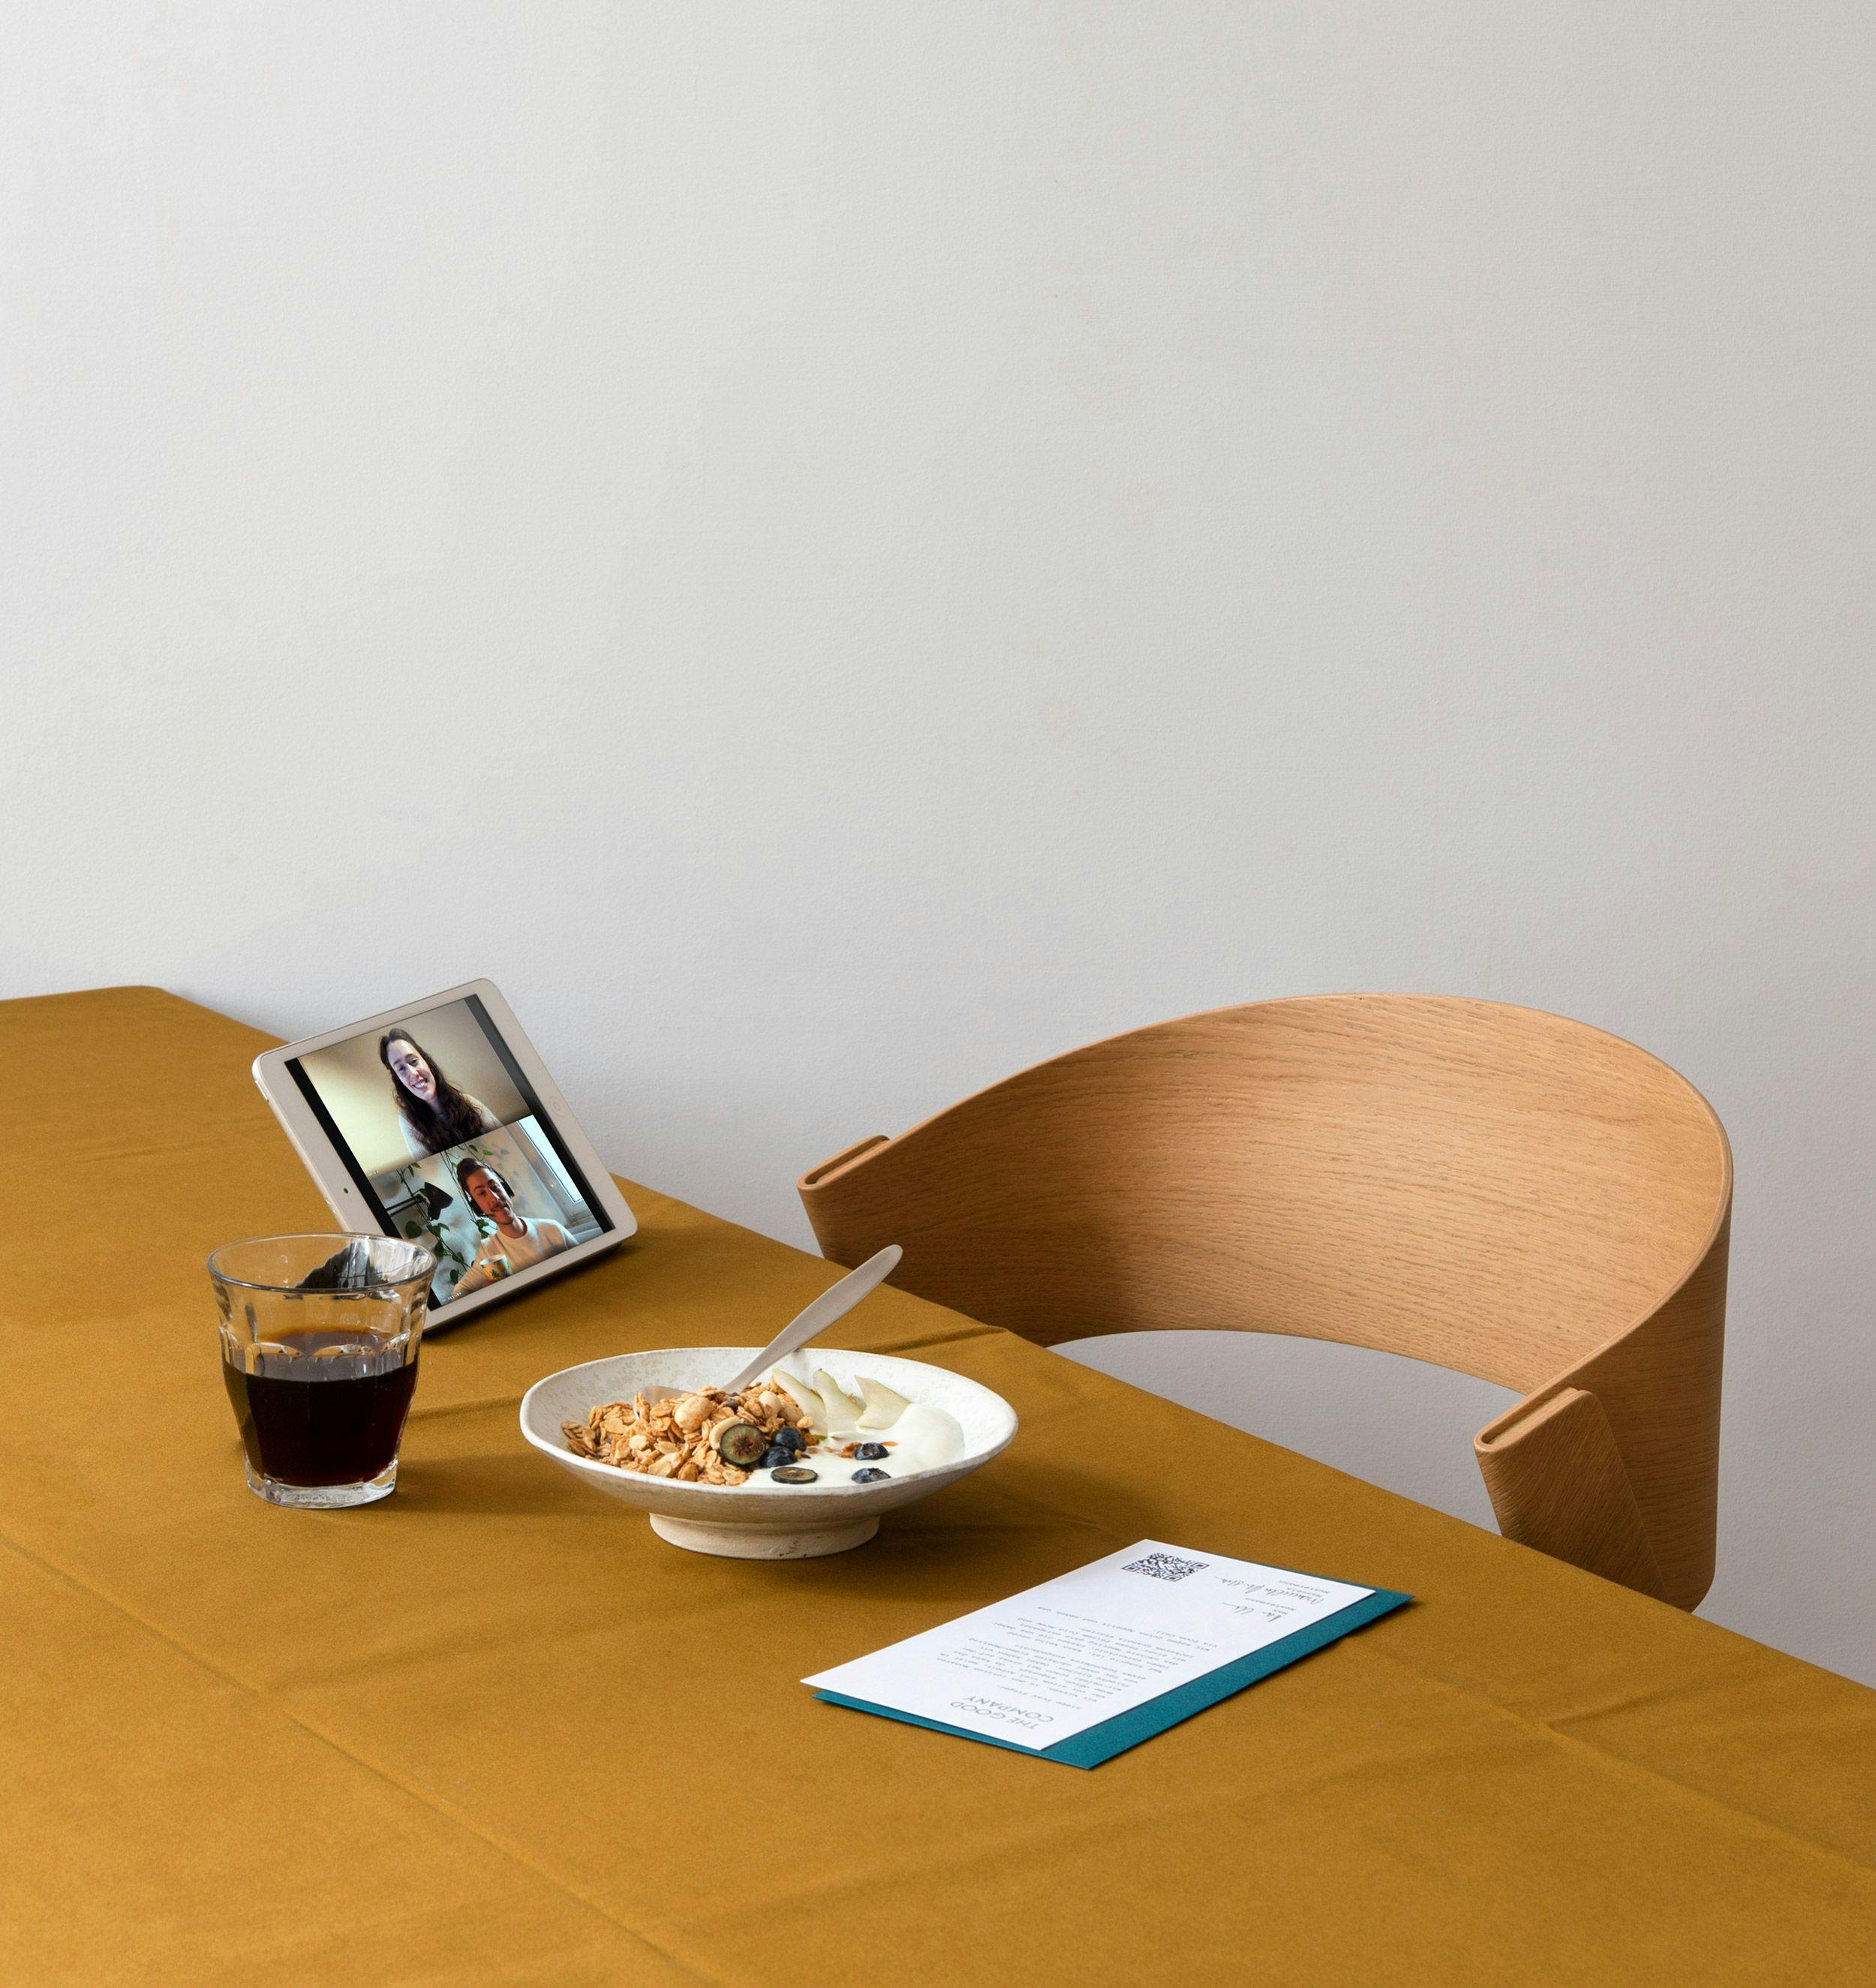 Sustainable meeting culture: Our Coffee Break Foodbox turns your cold call into a successful first meeting.